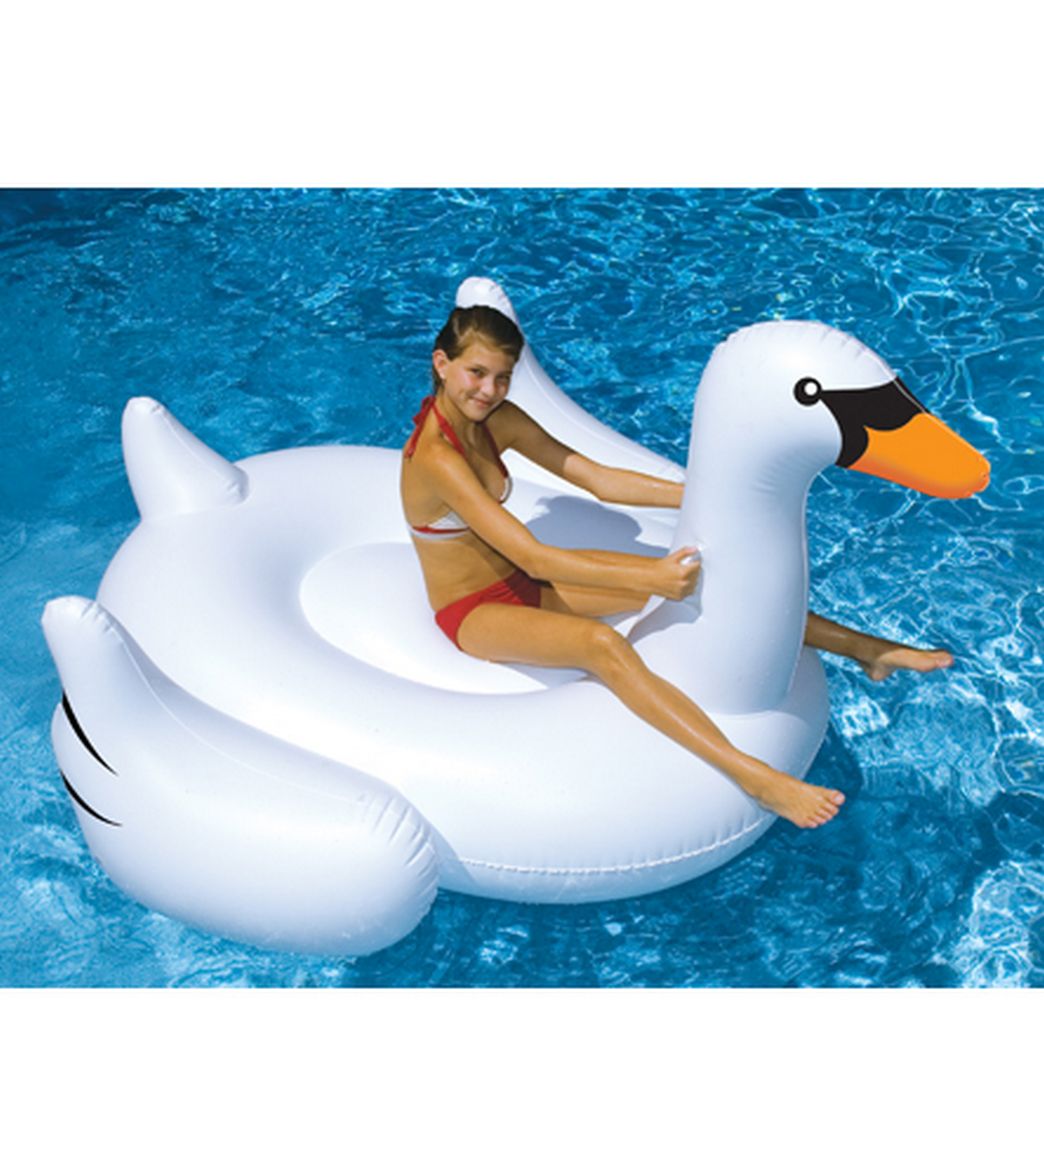 Swimline Giant Swan Ride-On Pool Float at SwimOutlet.com